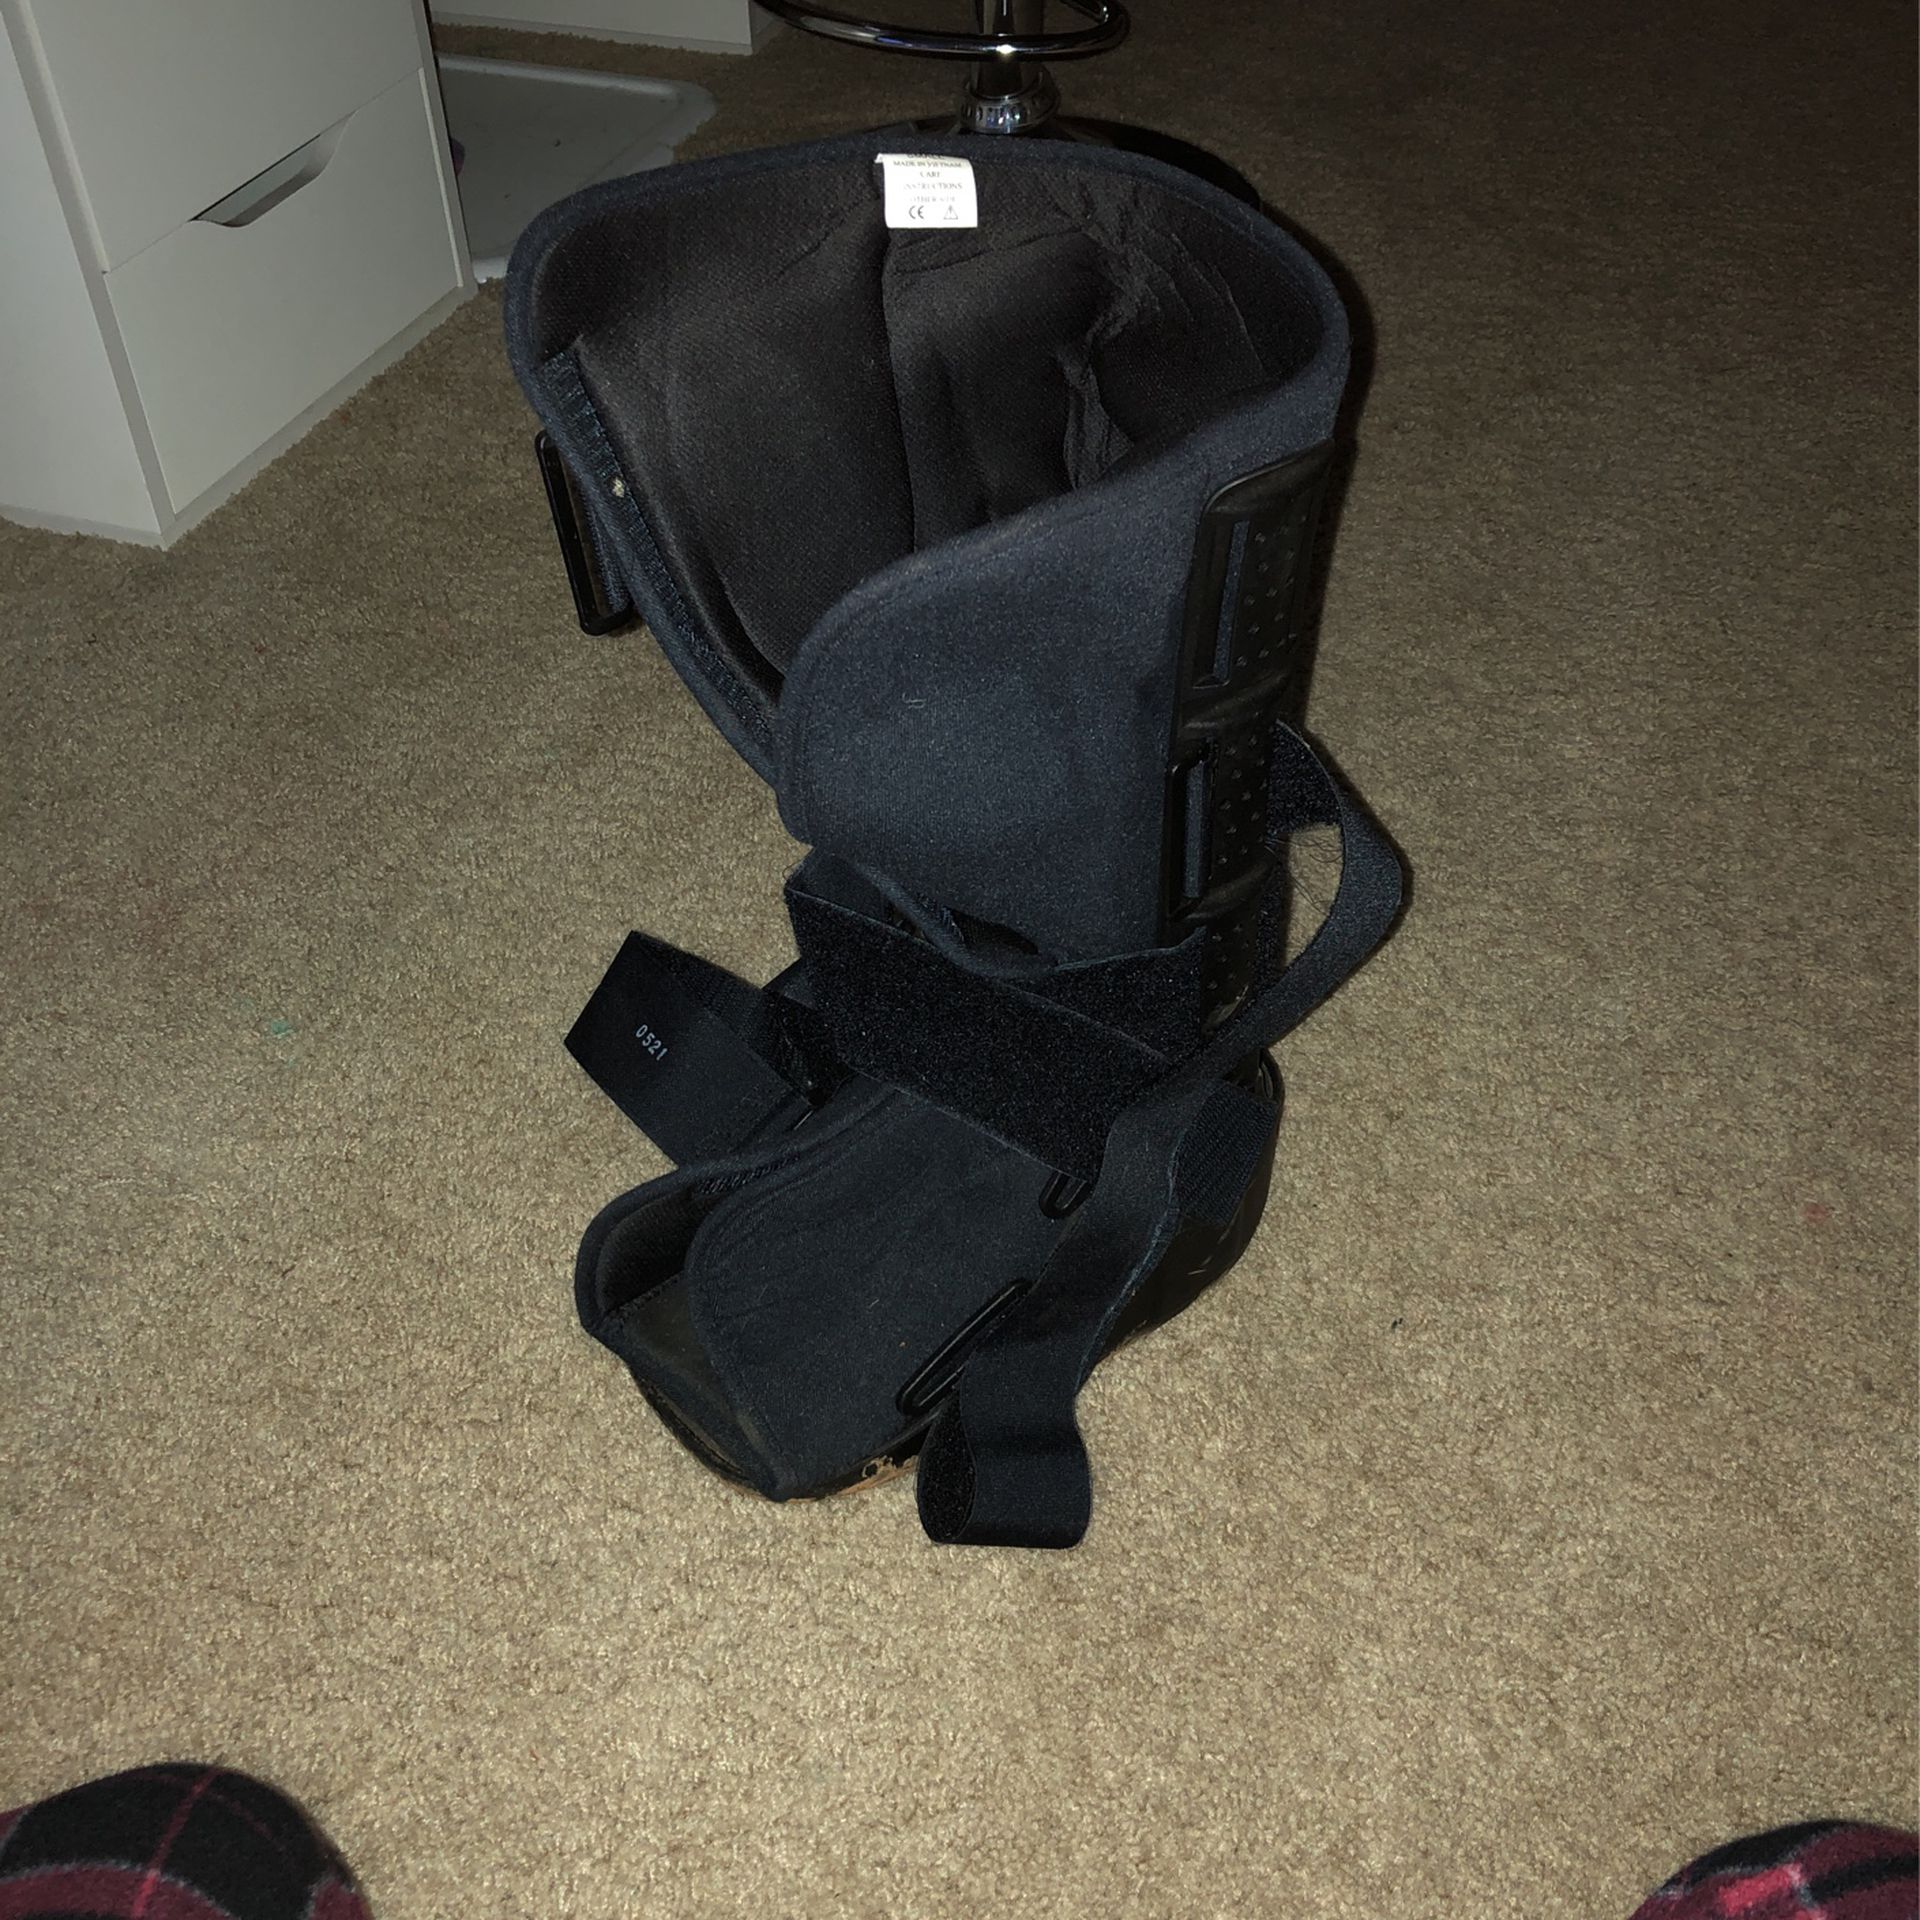 Small Boot For Sprane Or Broke Foot/ankle And Knee Brace  